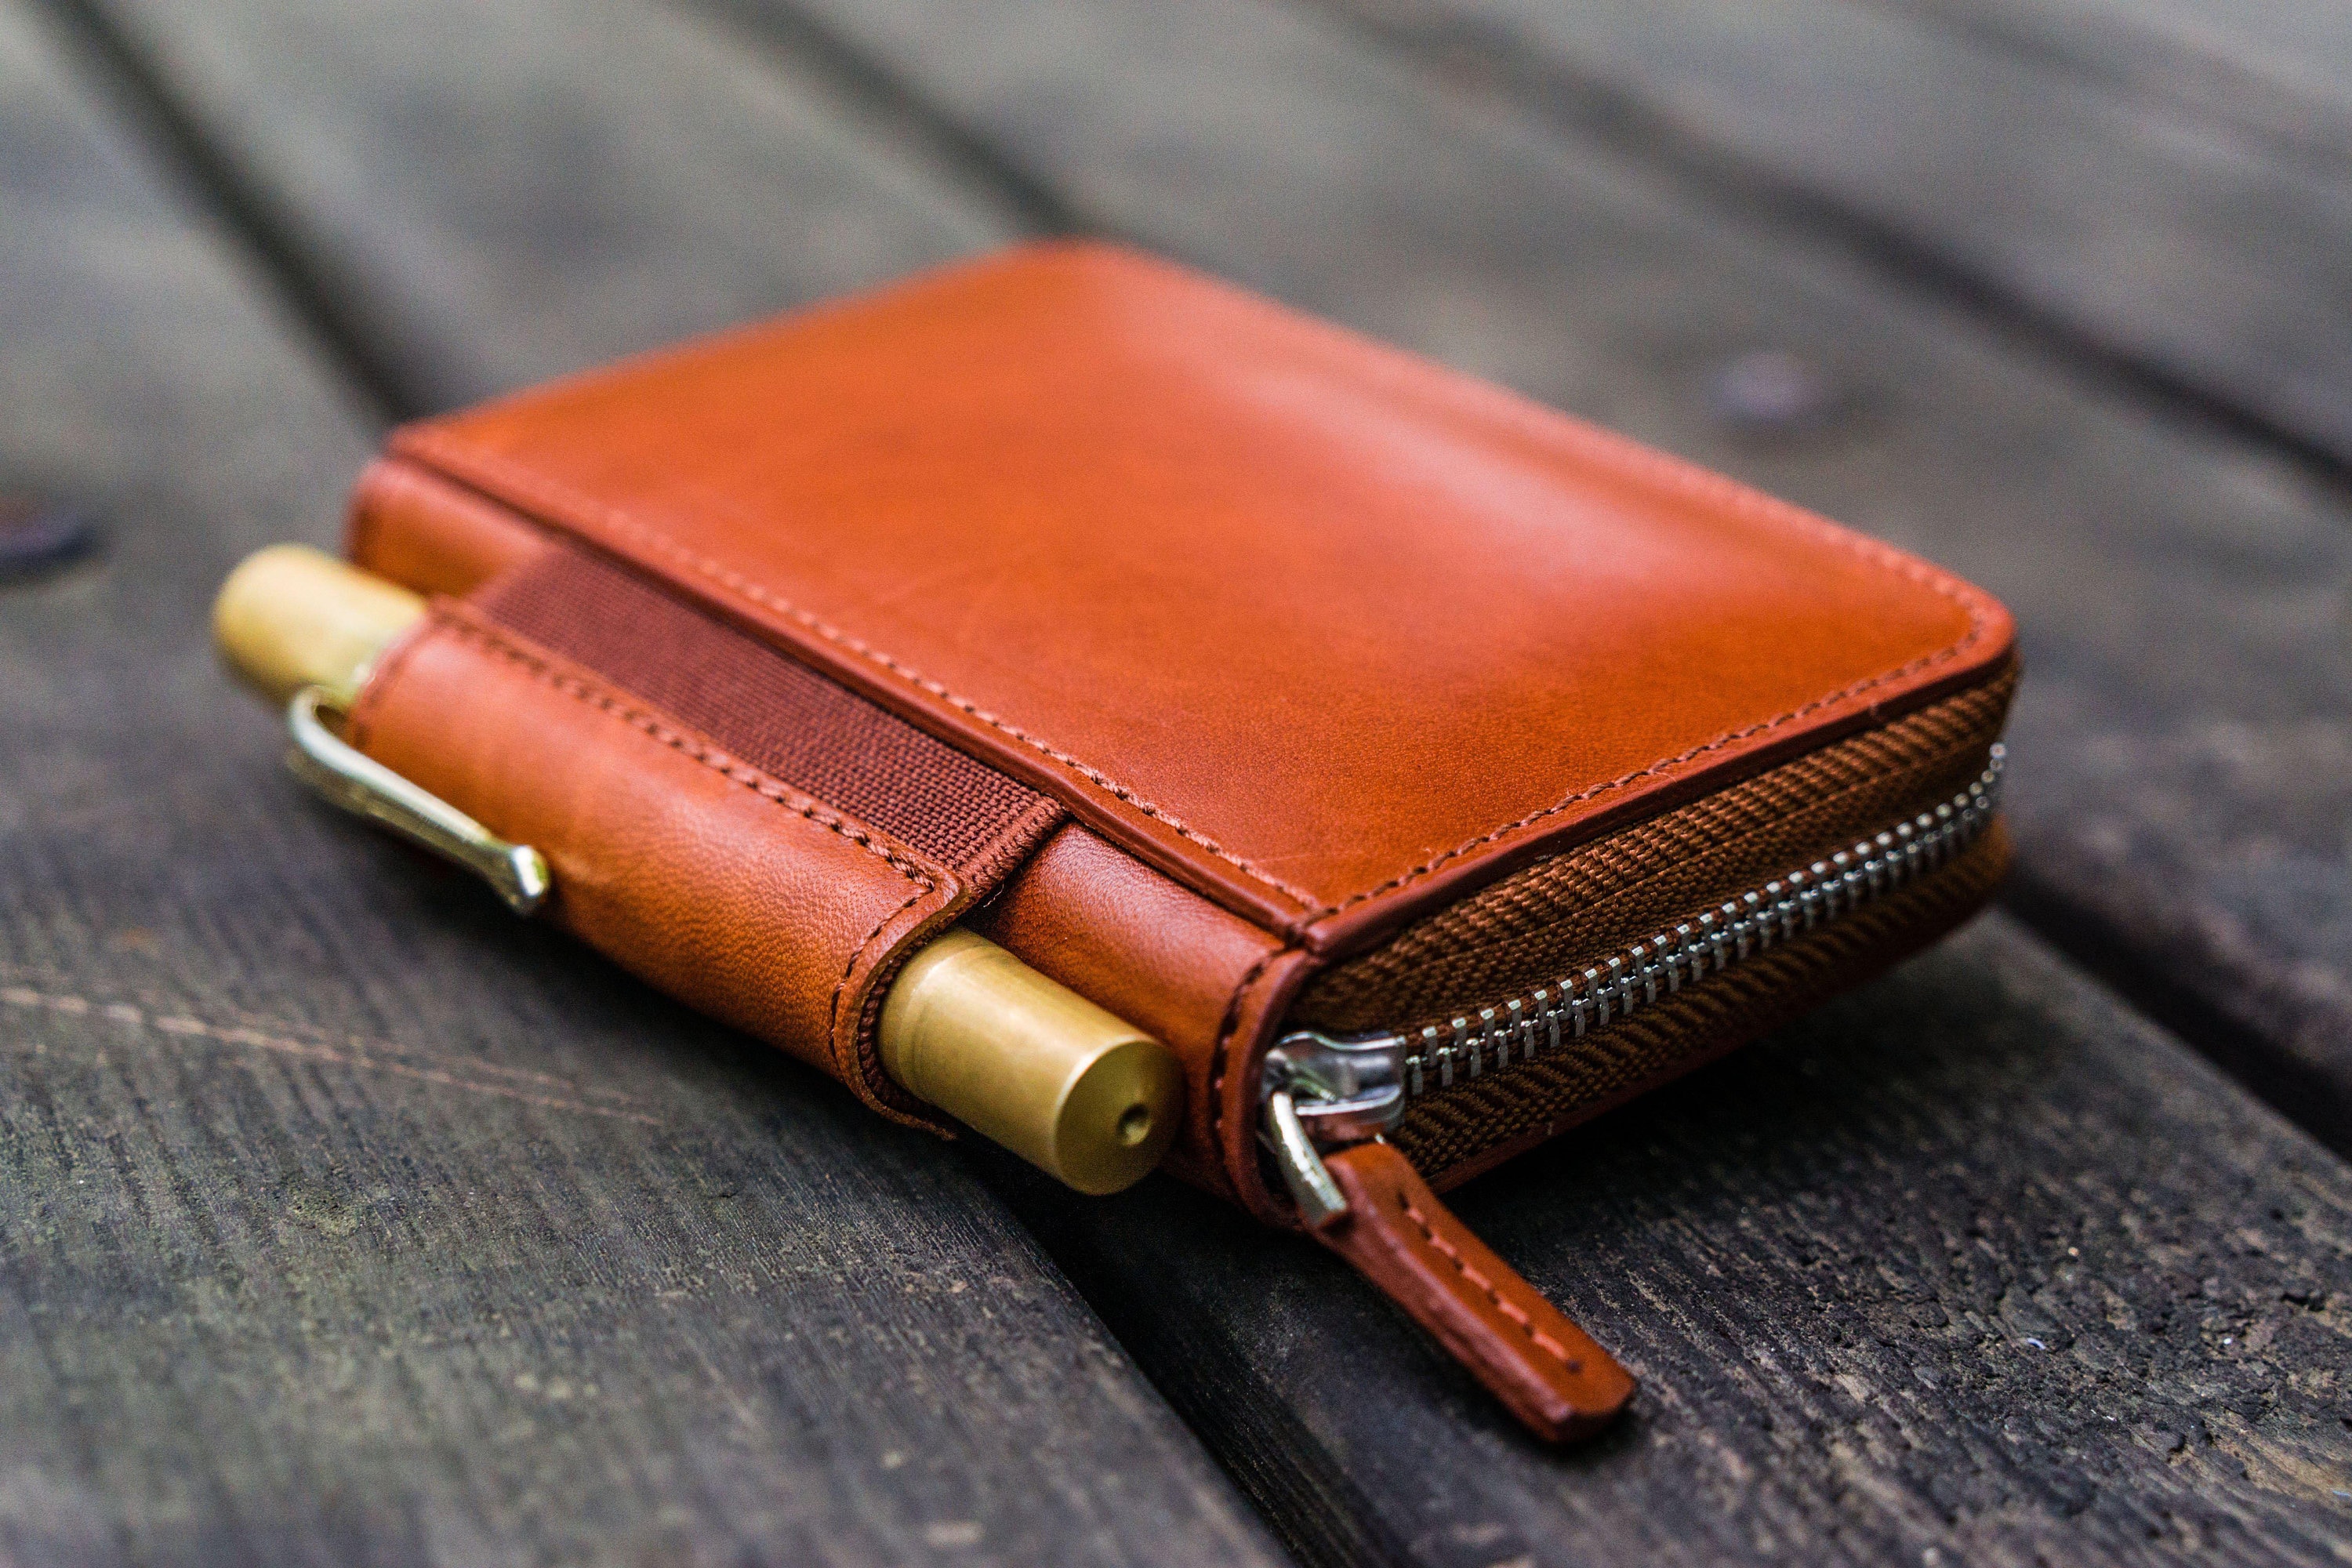 Buy Men's Full-Grain Leather Zipper Wallets - Small to Large - Galen Leather